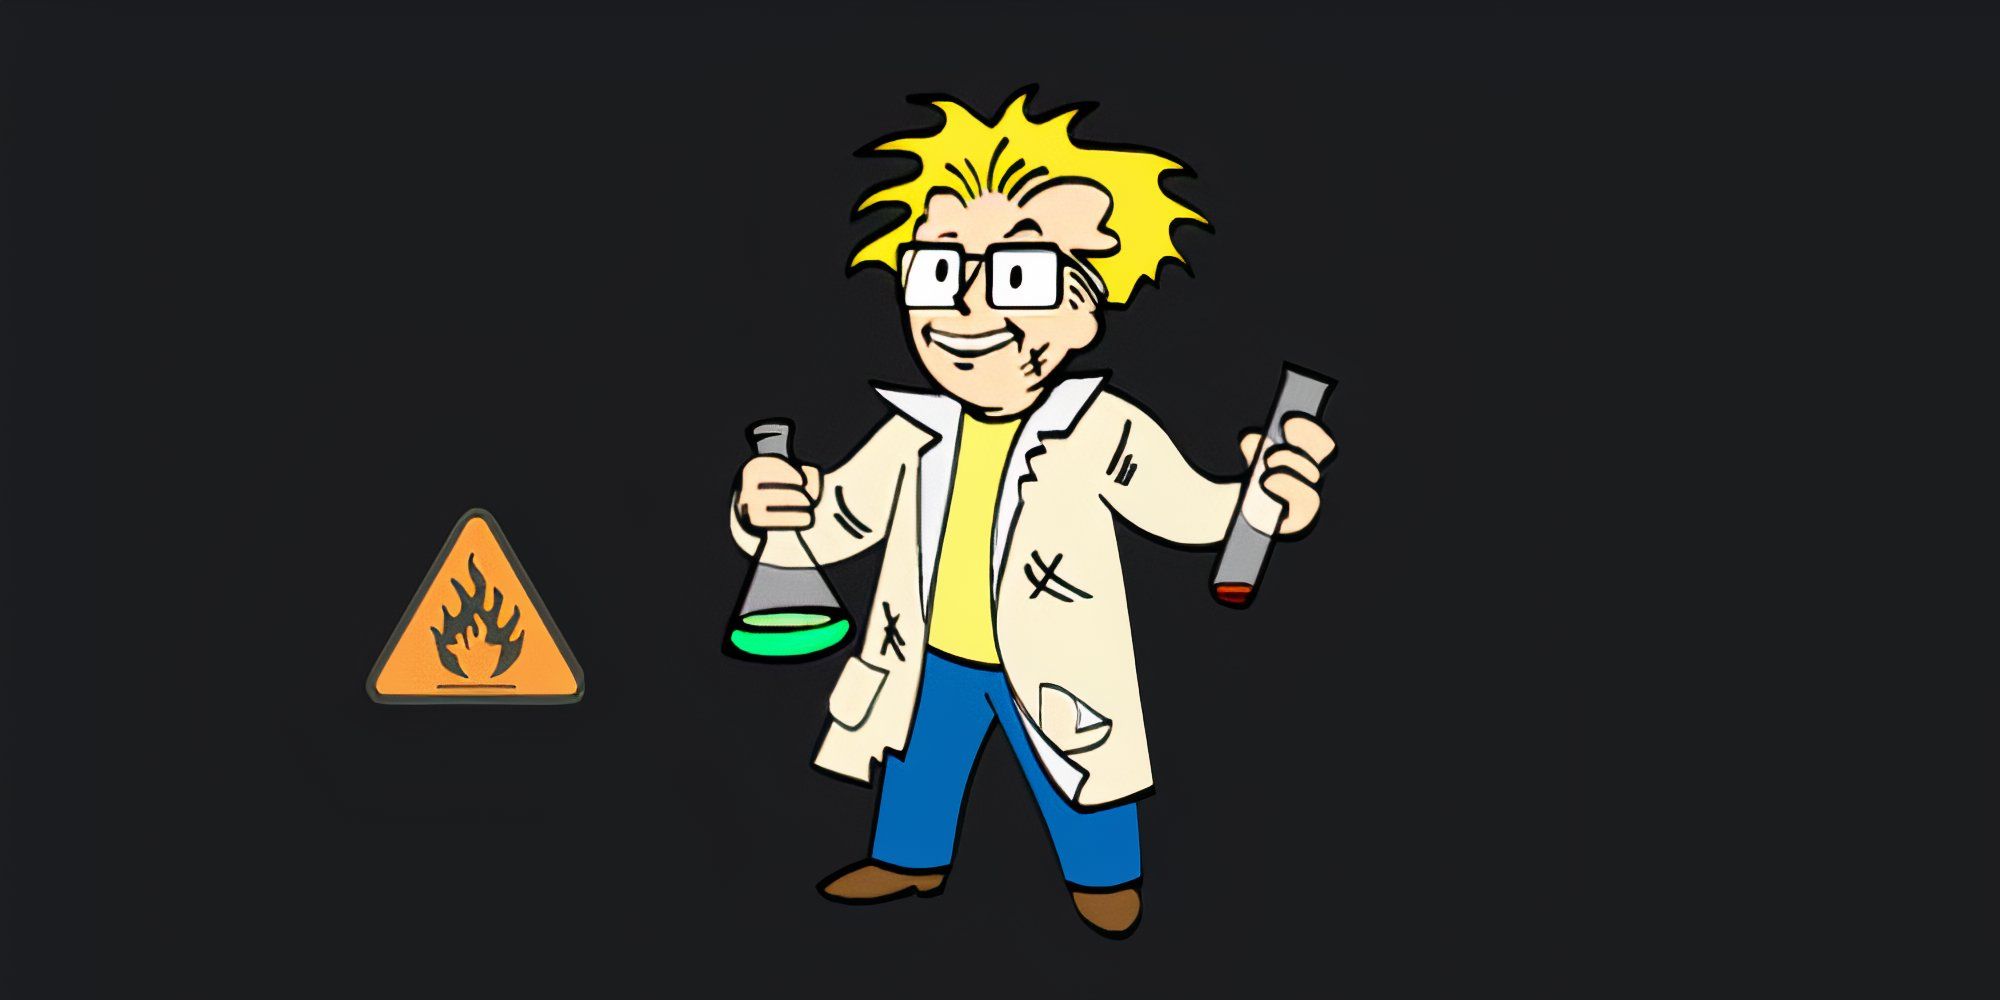 Vault Boy stands in a lab coat with hair standing up from an explosion